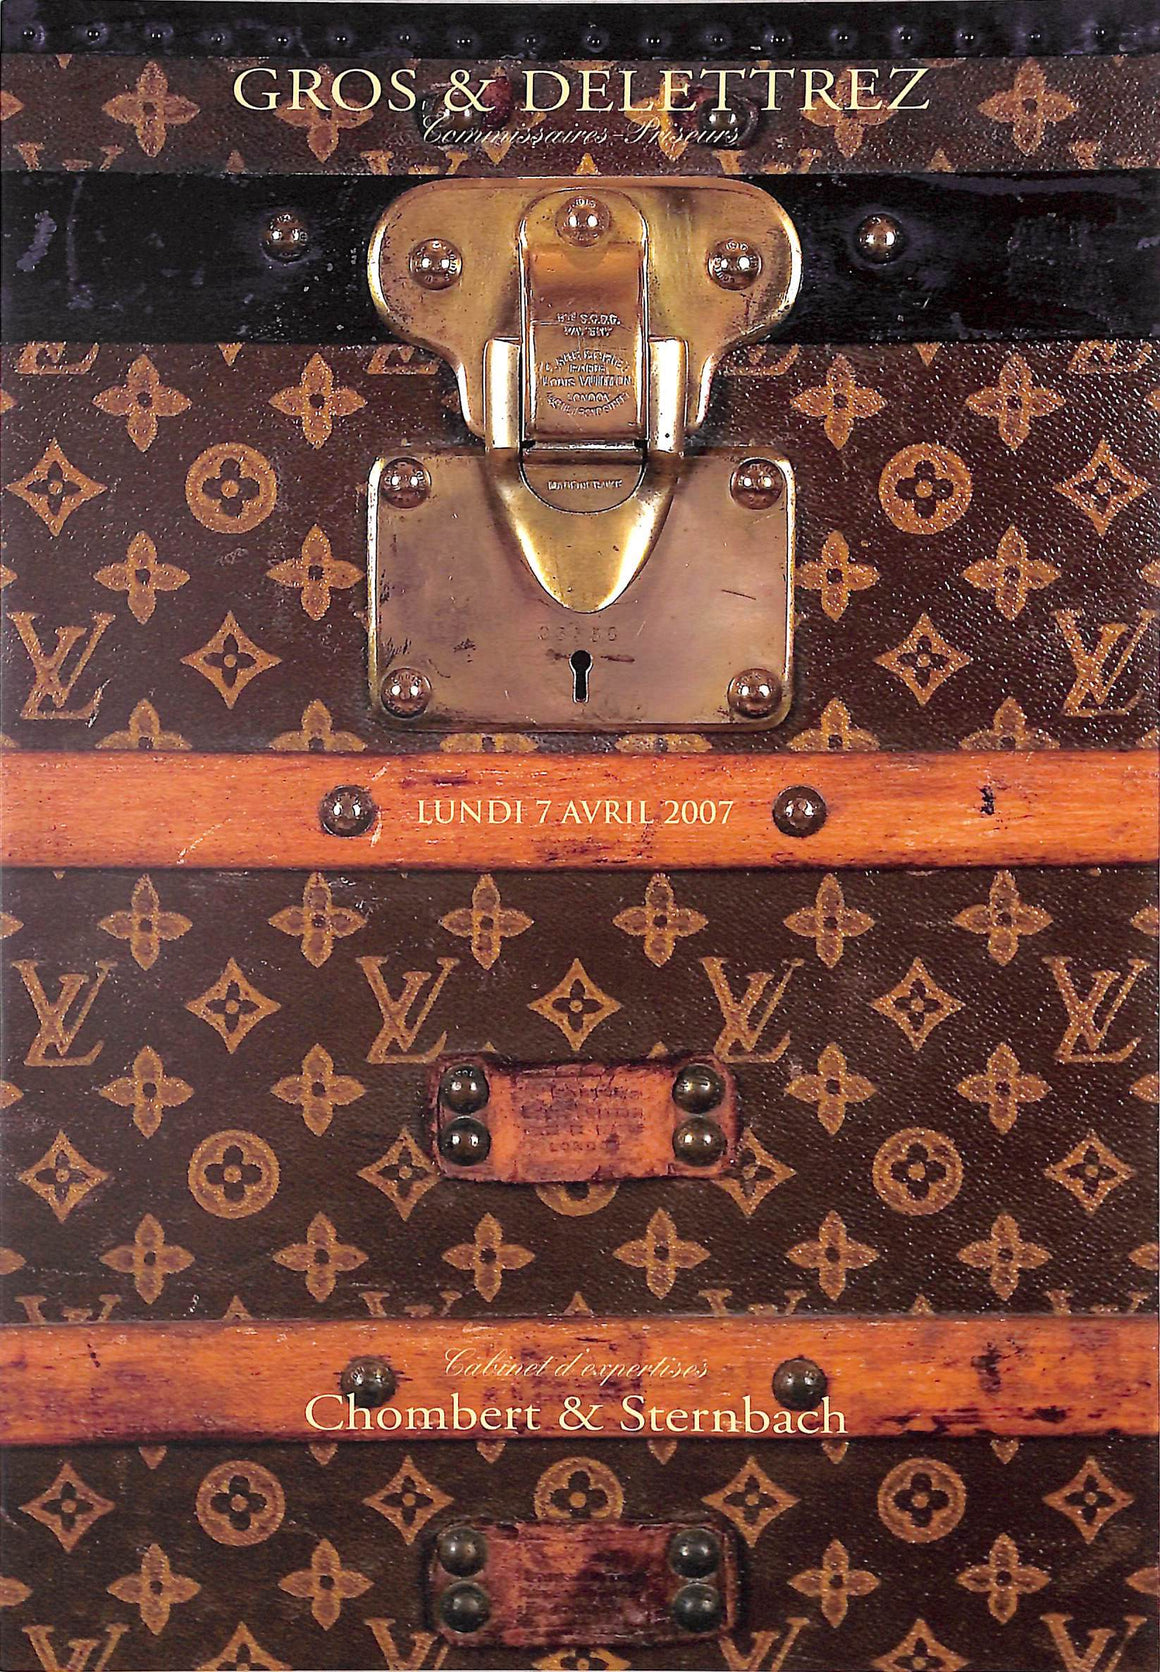 Louis Vuitton and Marc Jacobs - Derby Hotels Collection Blog Magazine